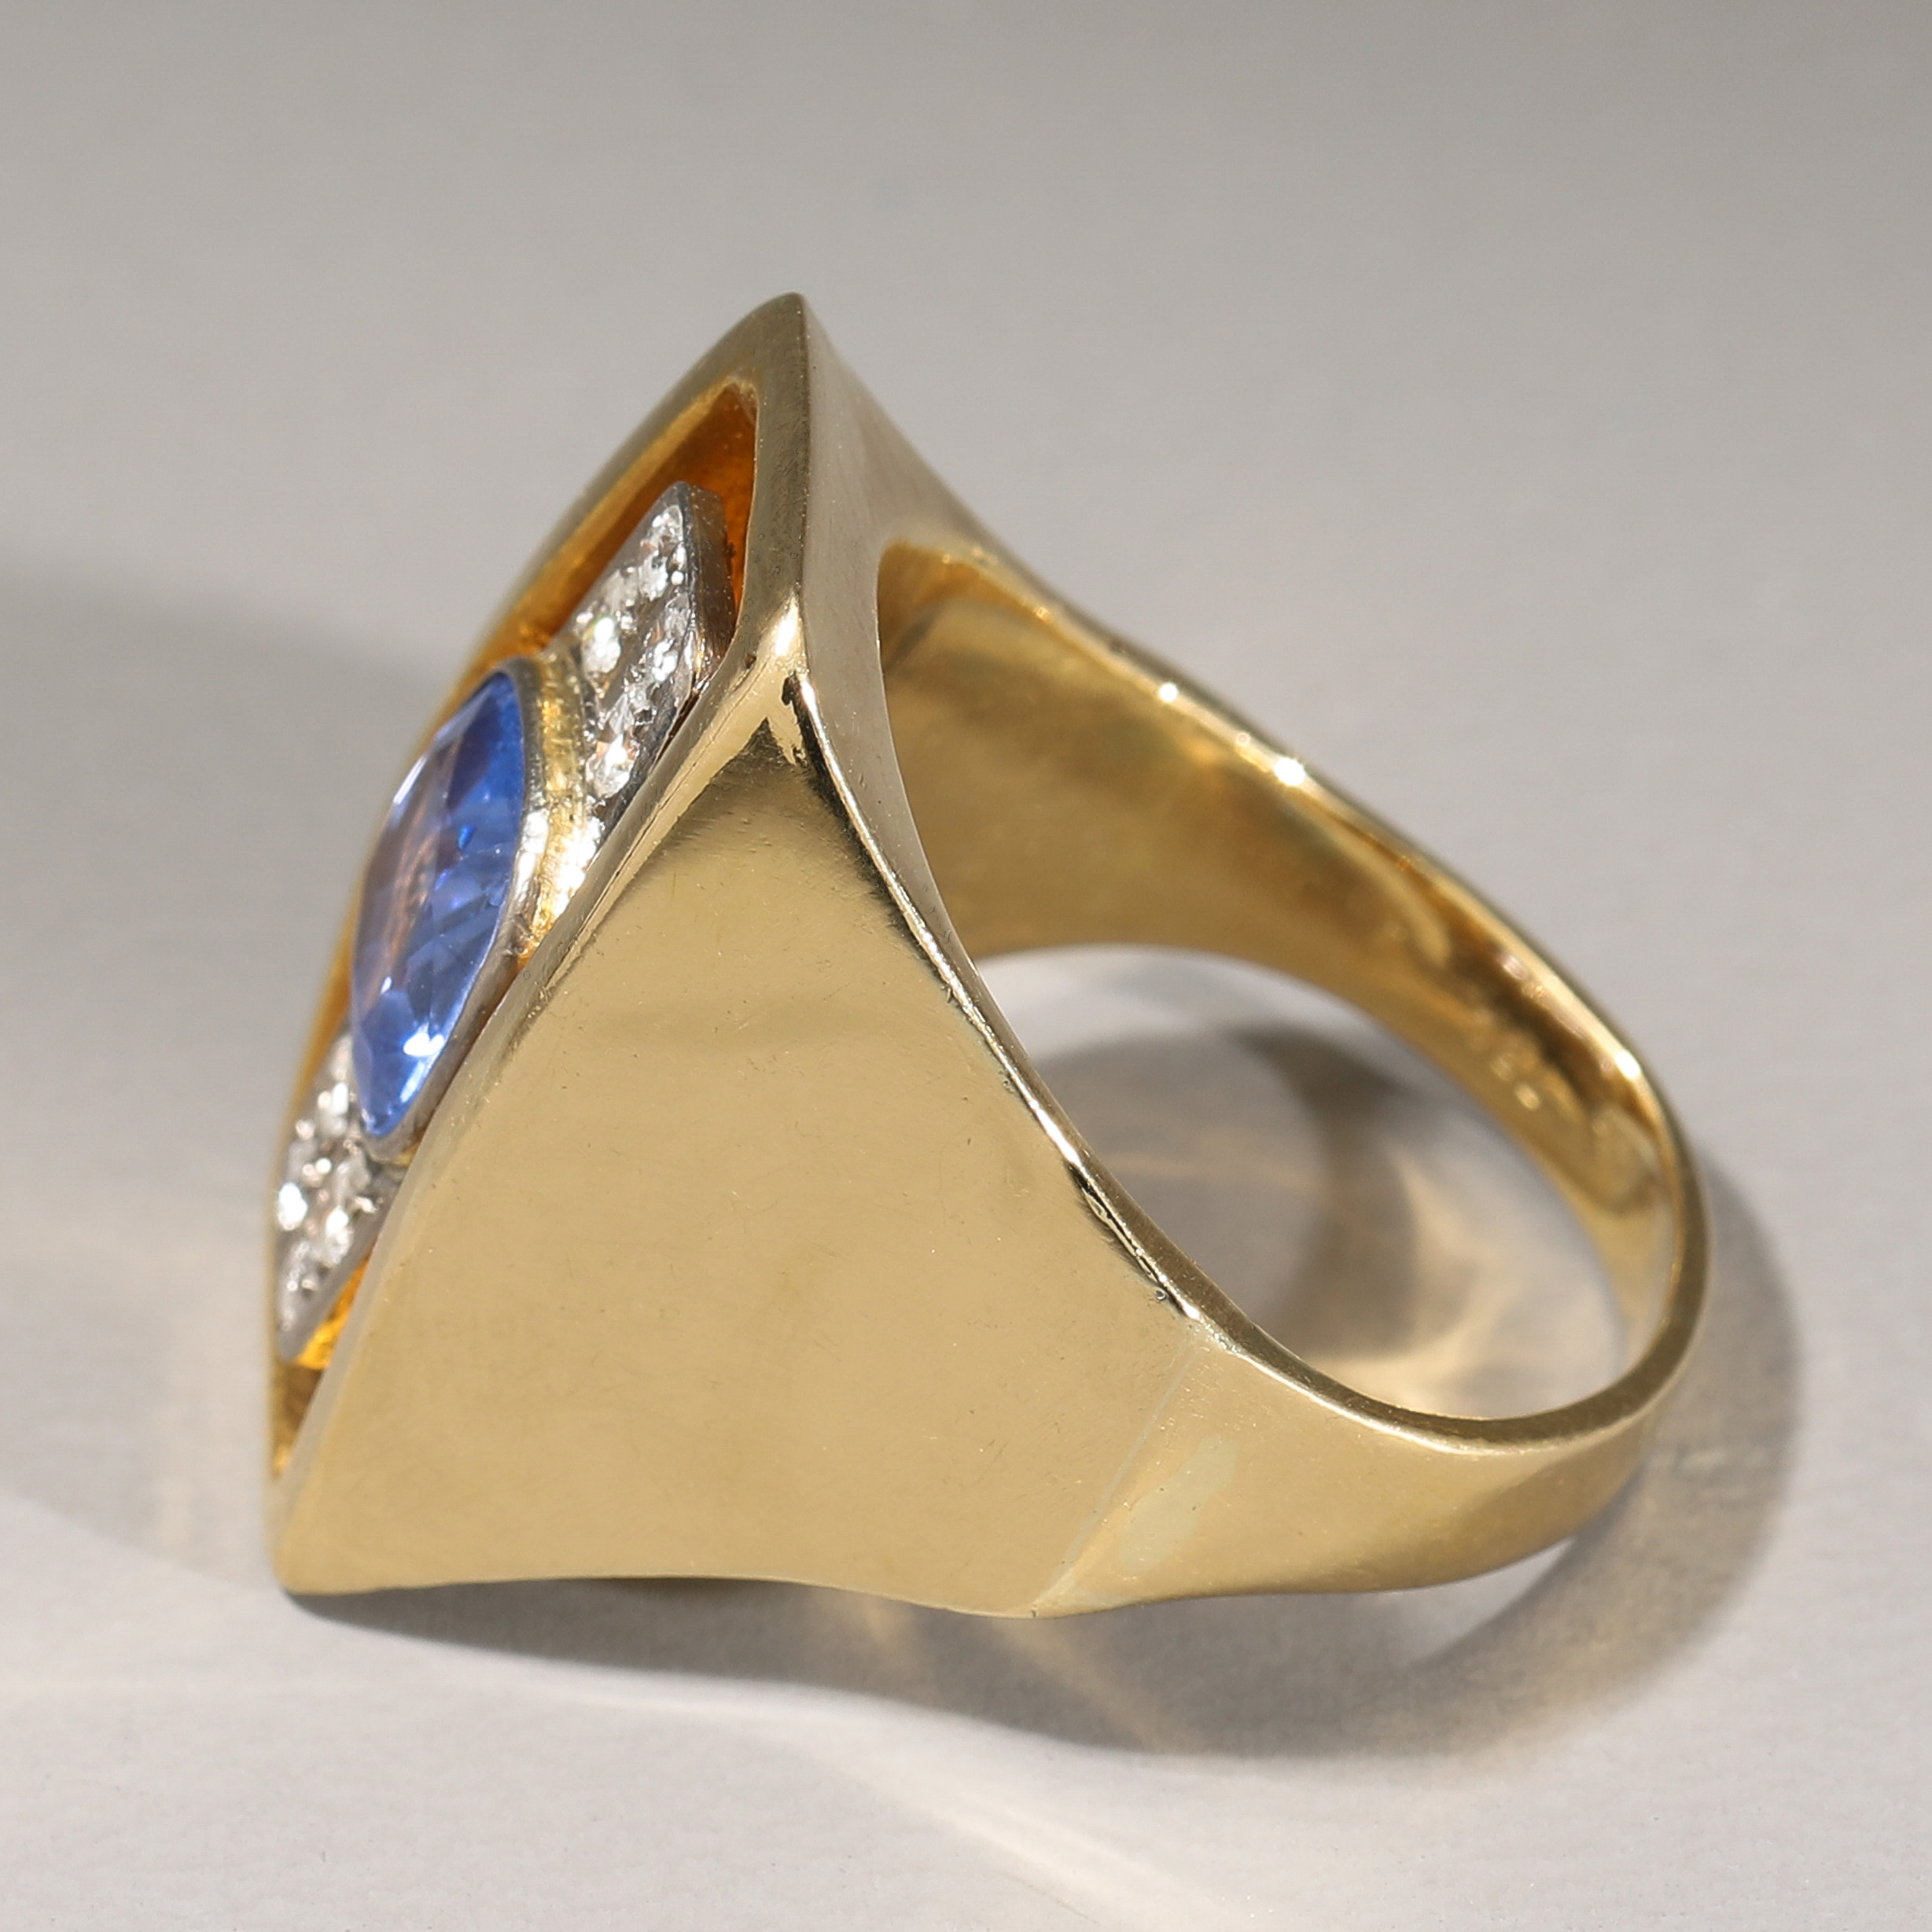 Germany, sapphire ring - Image 5 of 7